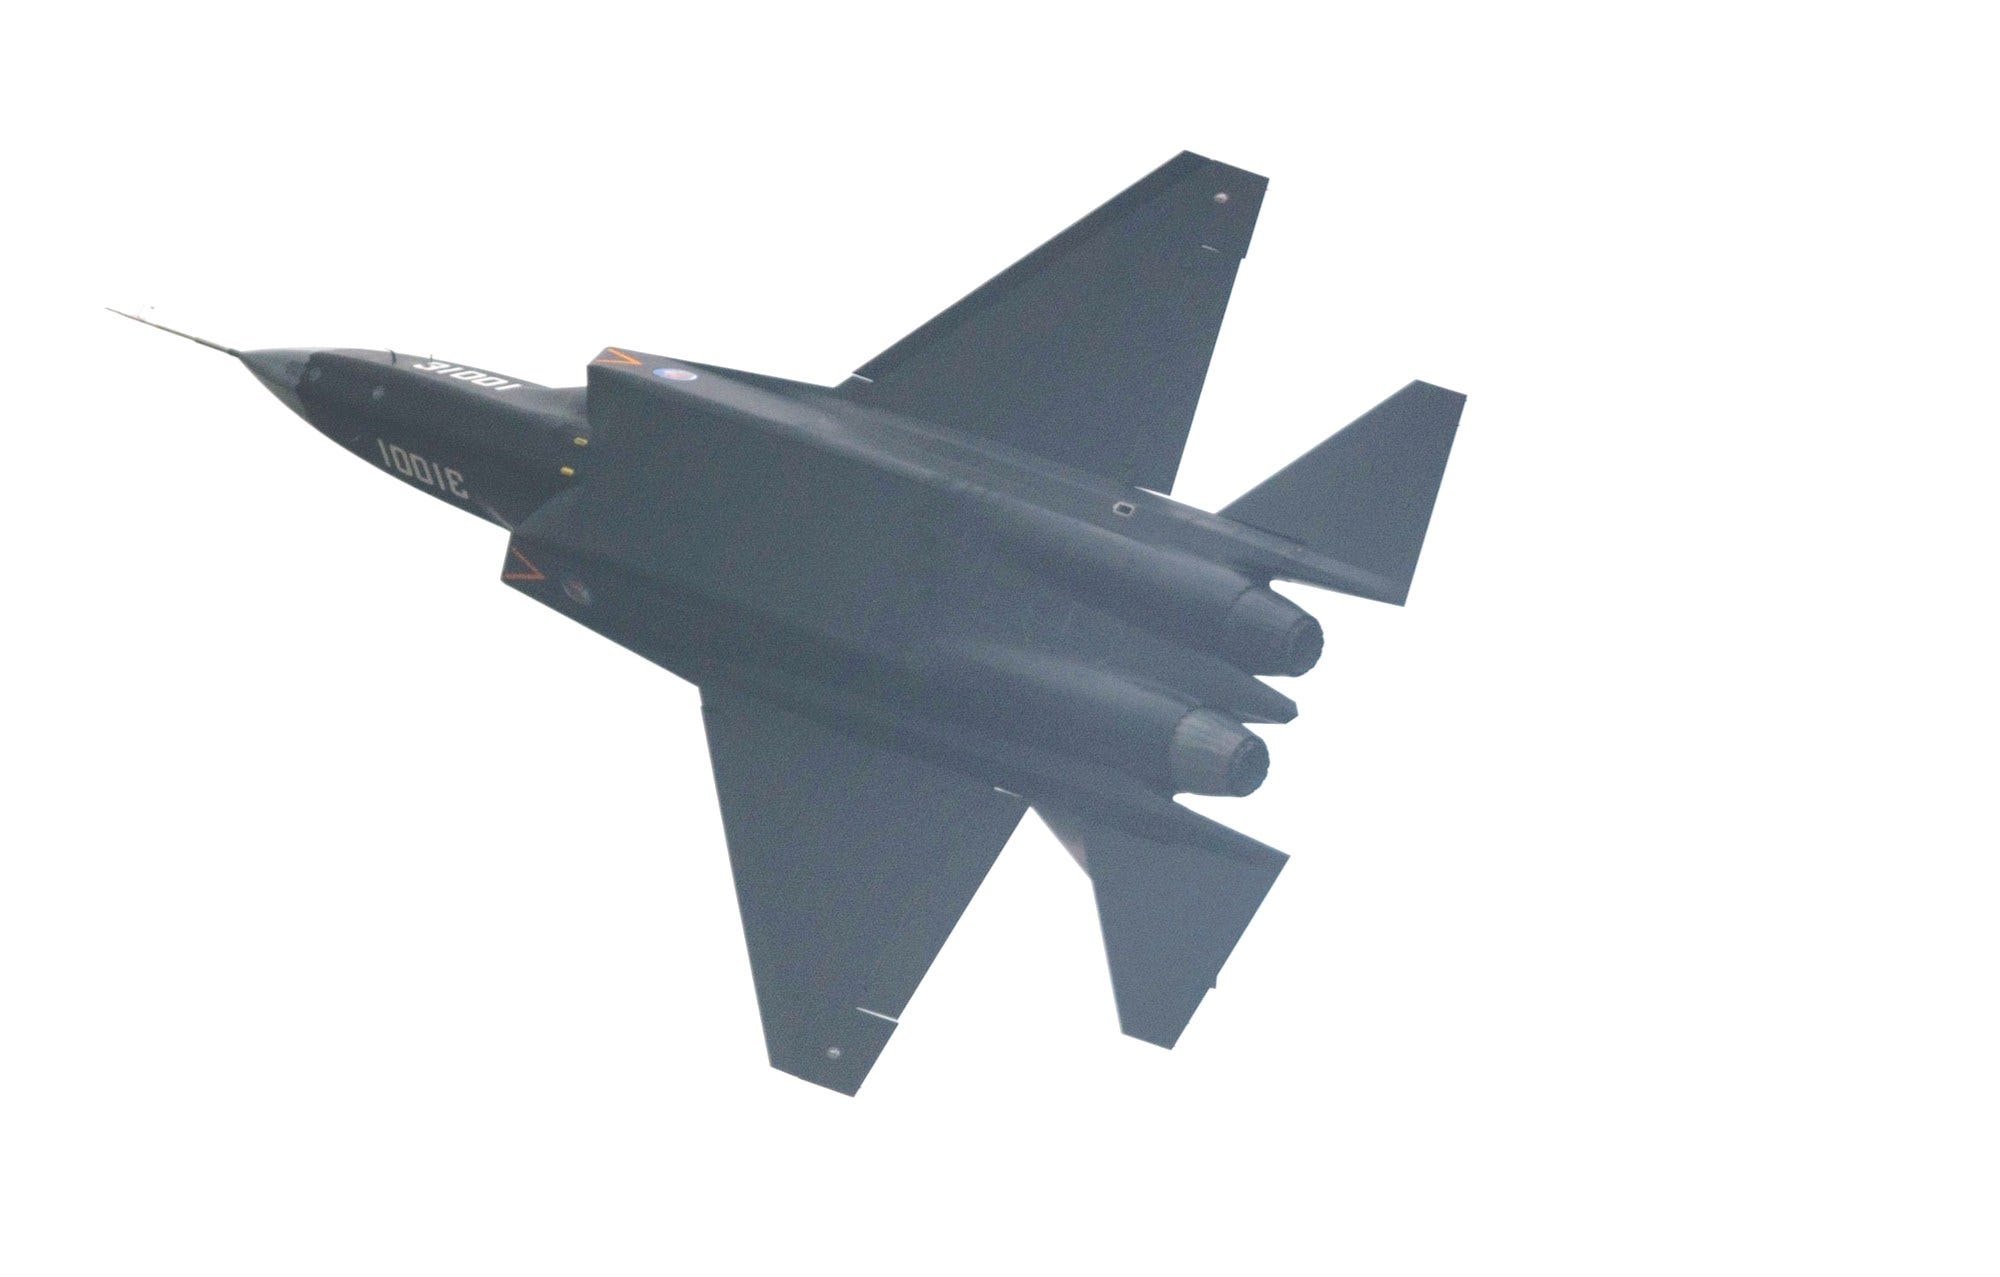 A Chinese FC-31 J-31 stealth fighter